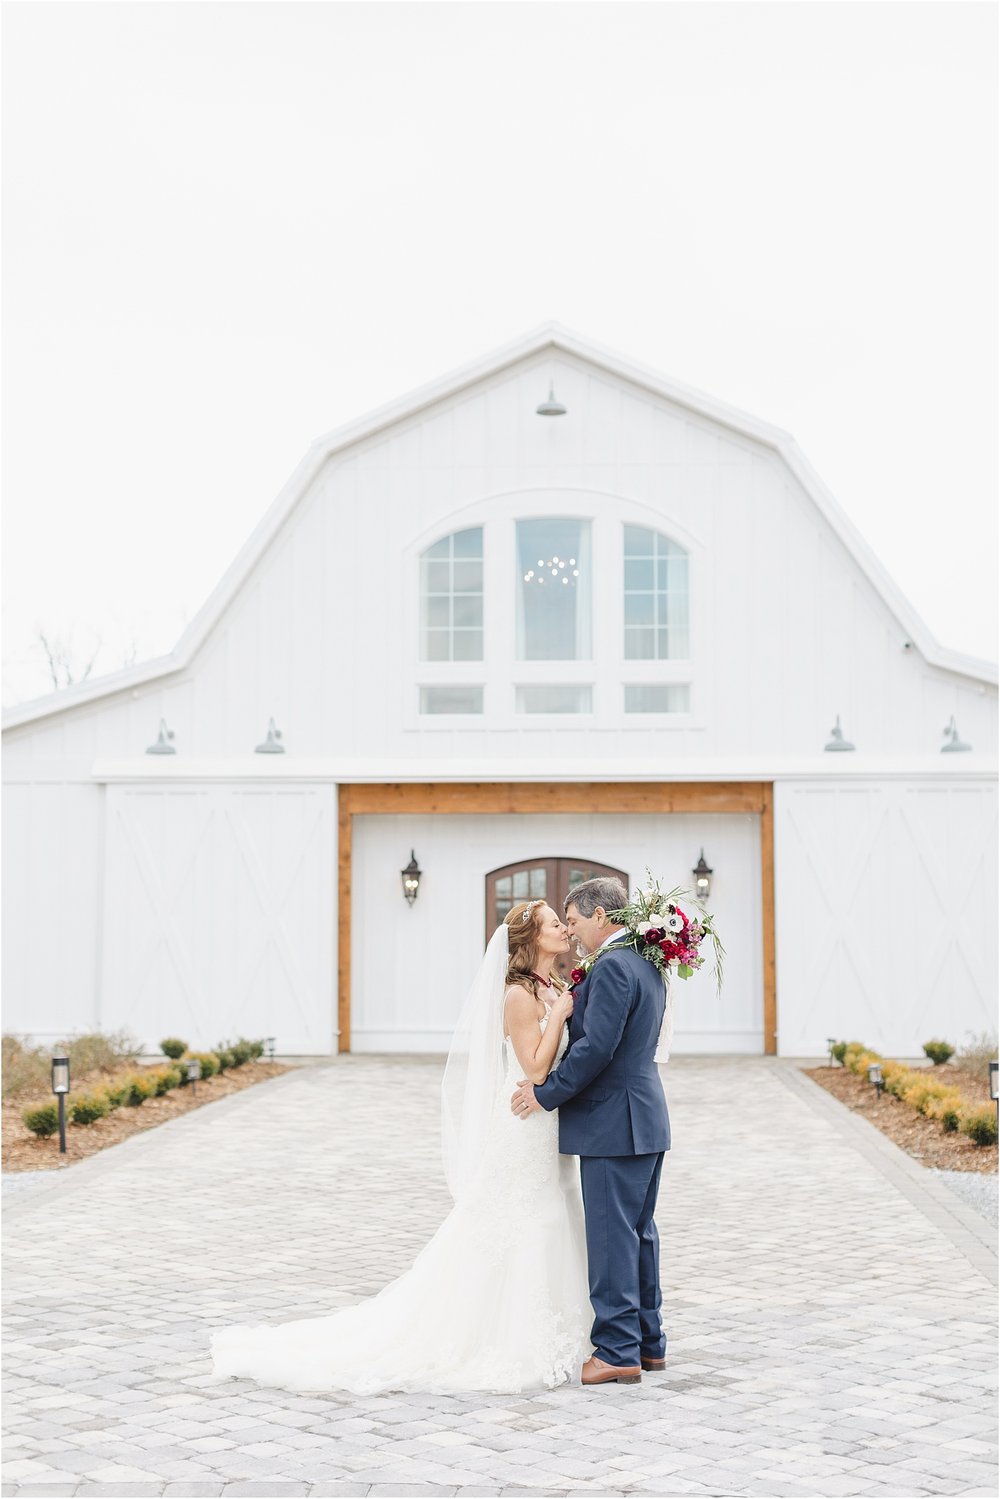 Posed Photo of Bride and Groom in Front of Barn Venue